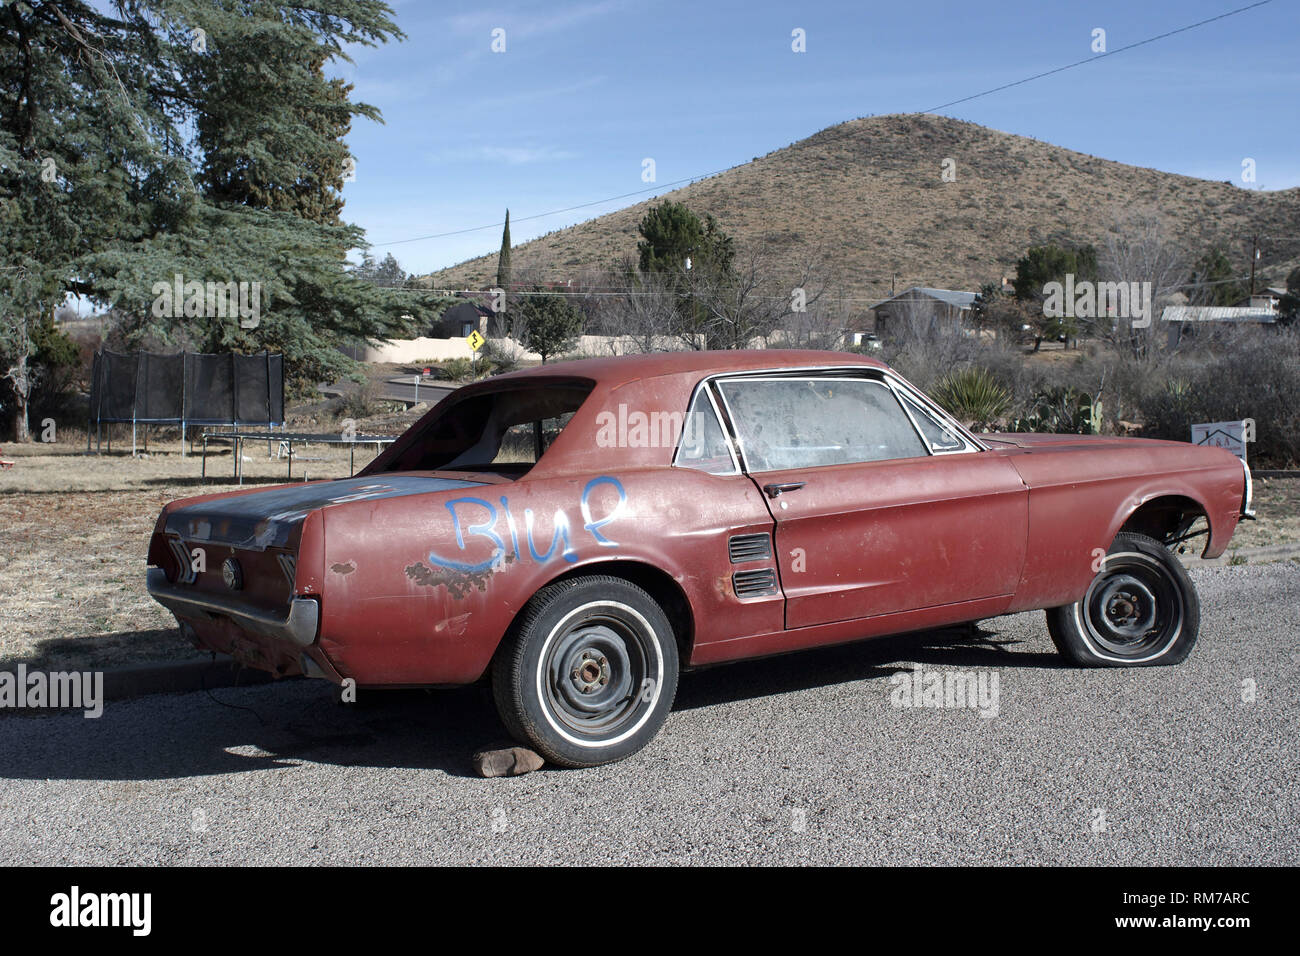 Old Ford Mustang , without engine and in overall poor condition, for sale in a street of Alpine, Texas. Stock Photo